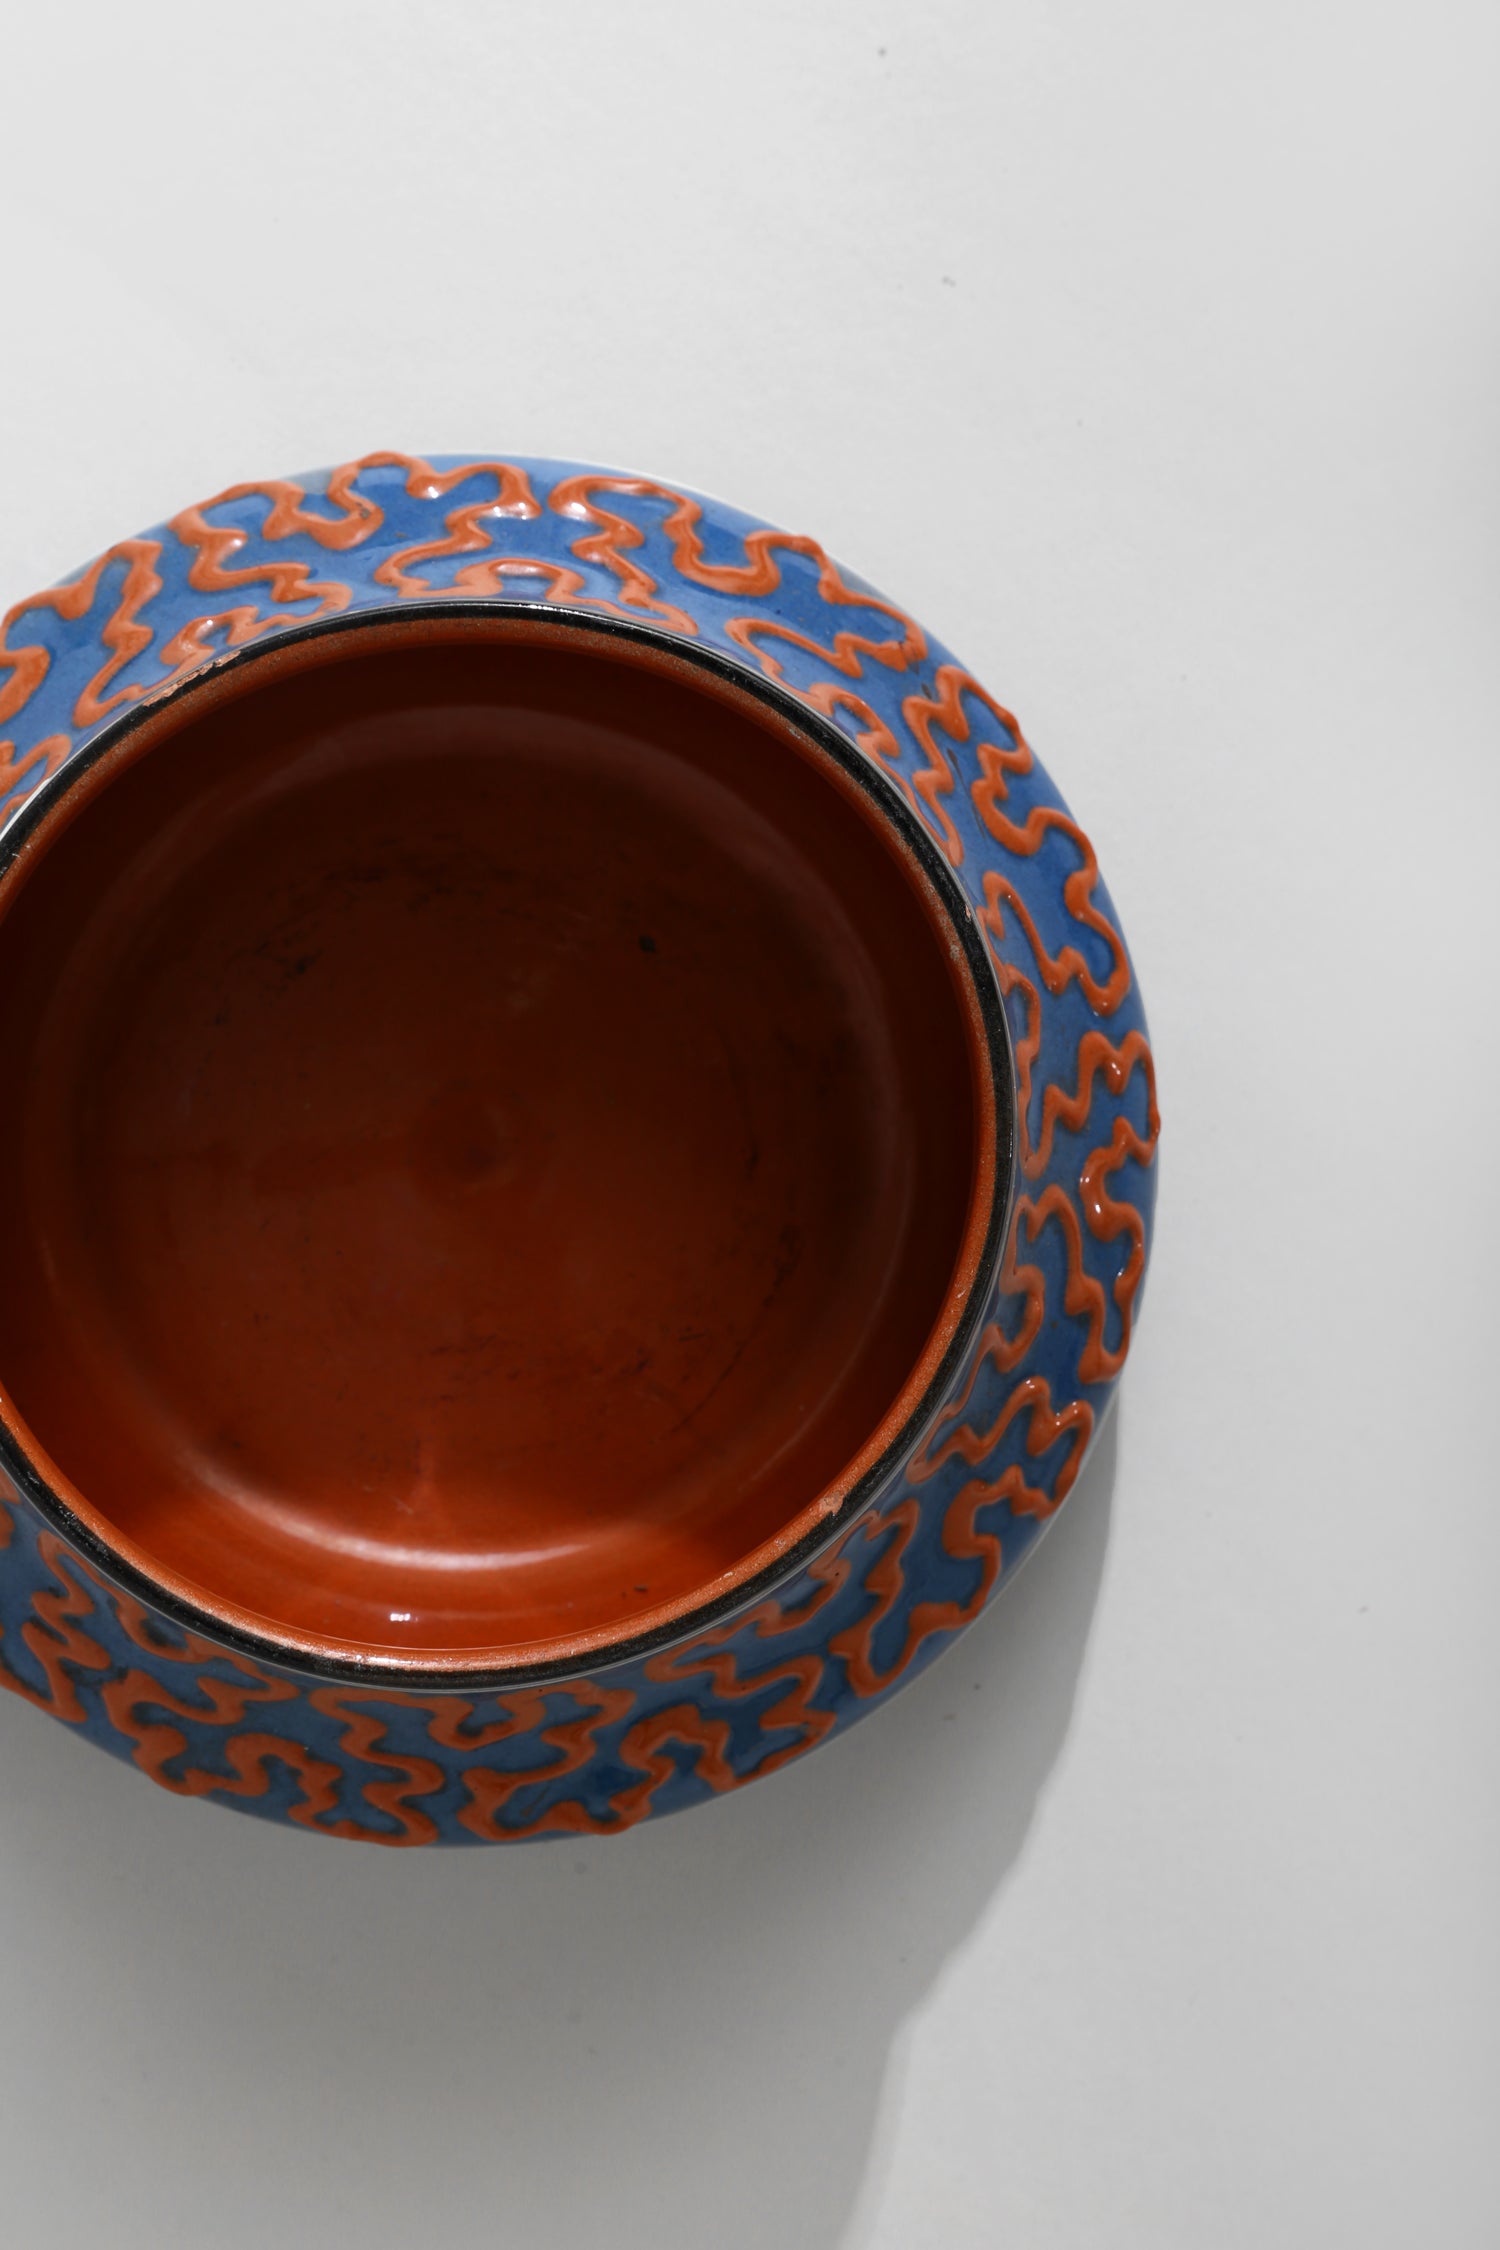 Matisse Pottery